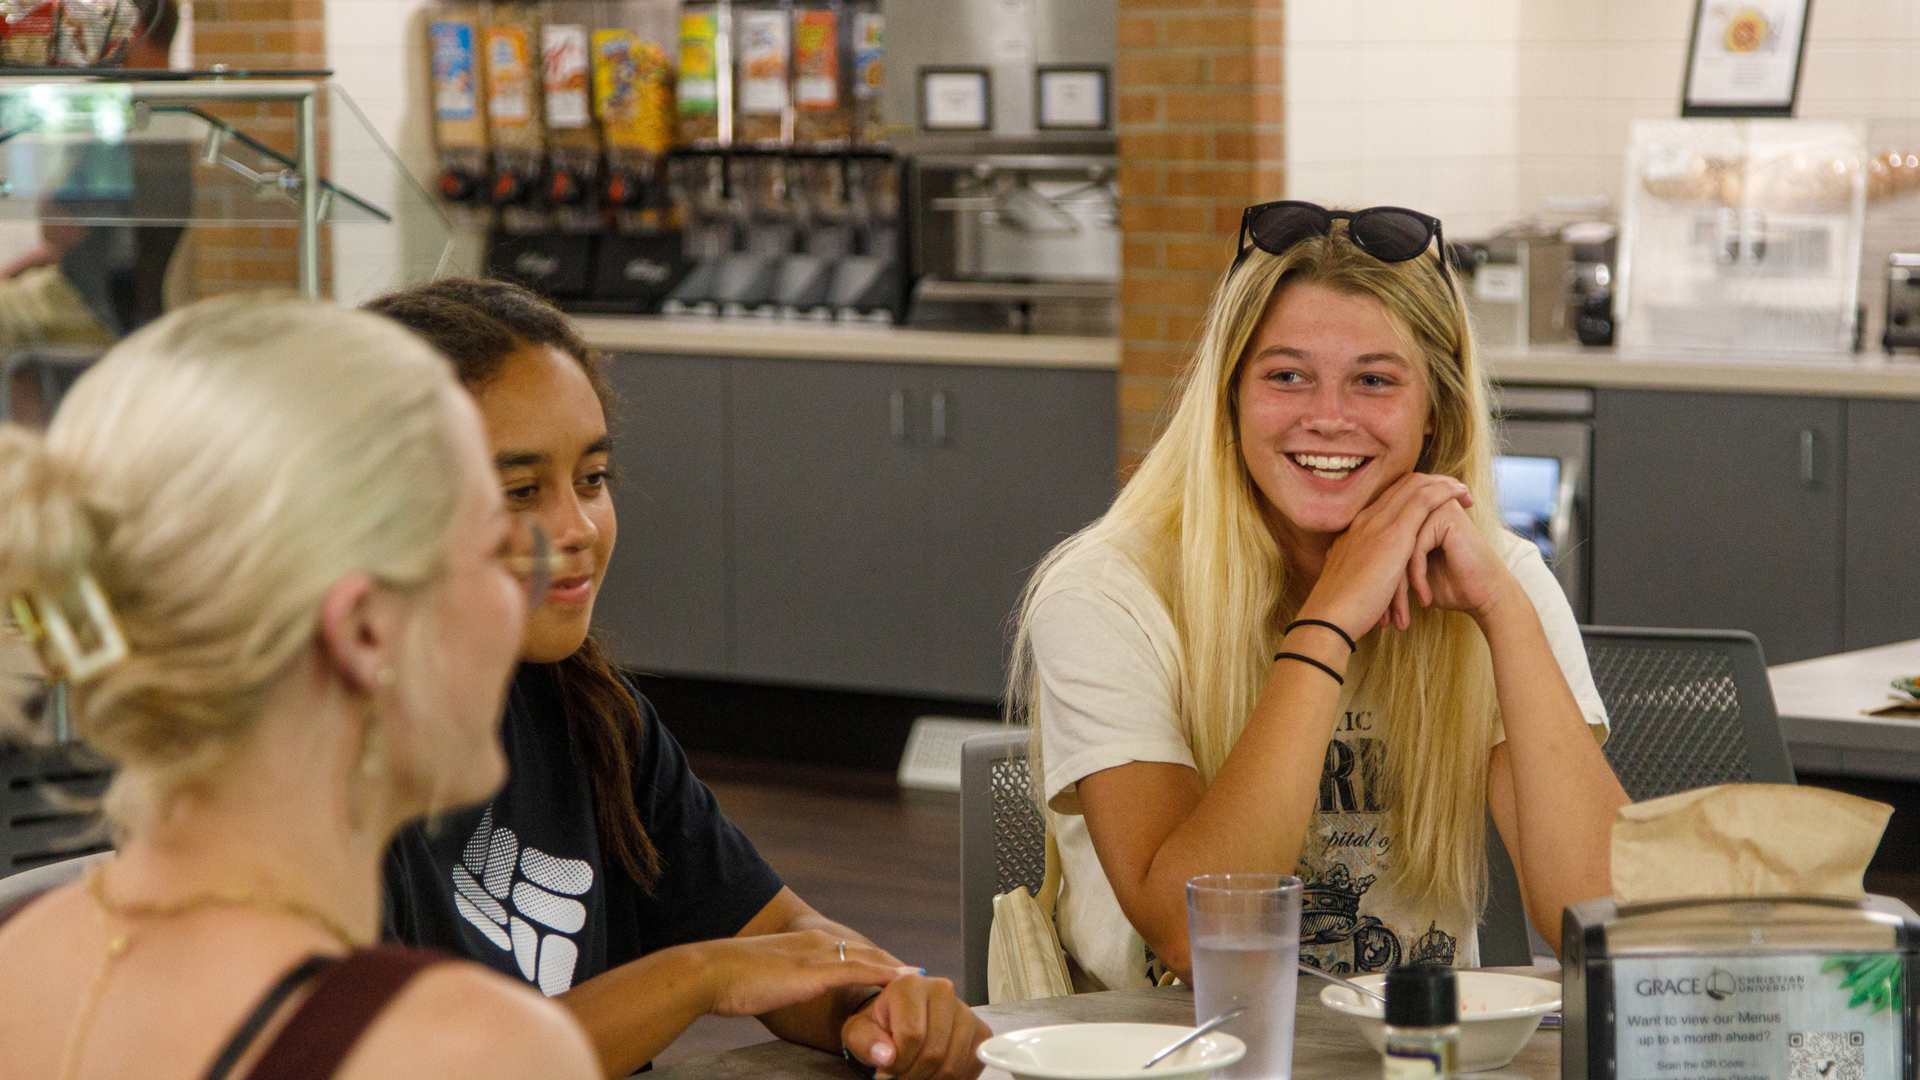 Happy Grace Students sit around a table in the dining hall, at Grace Christian University, during a Campus Tour